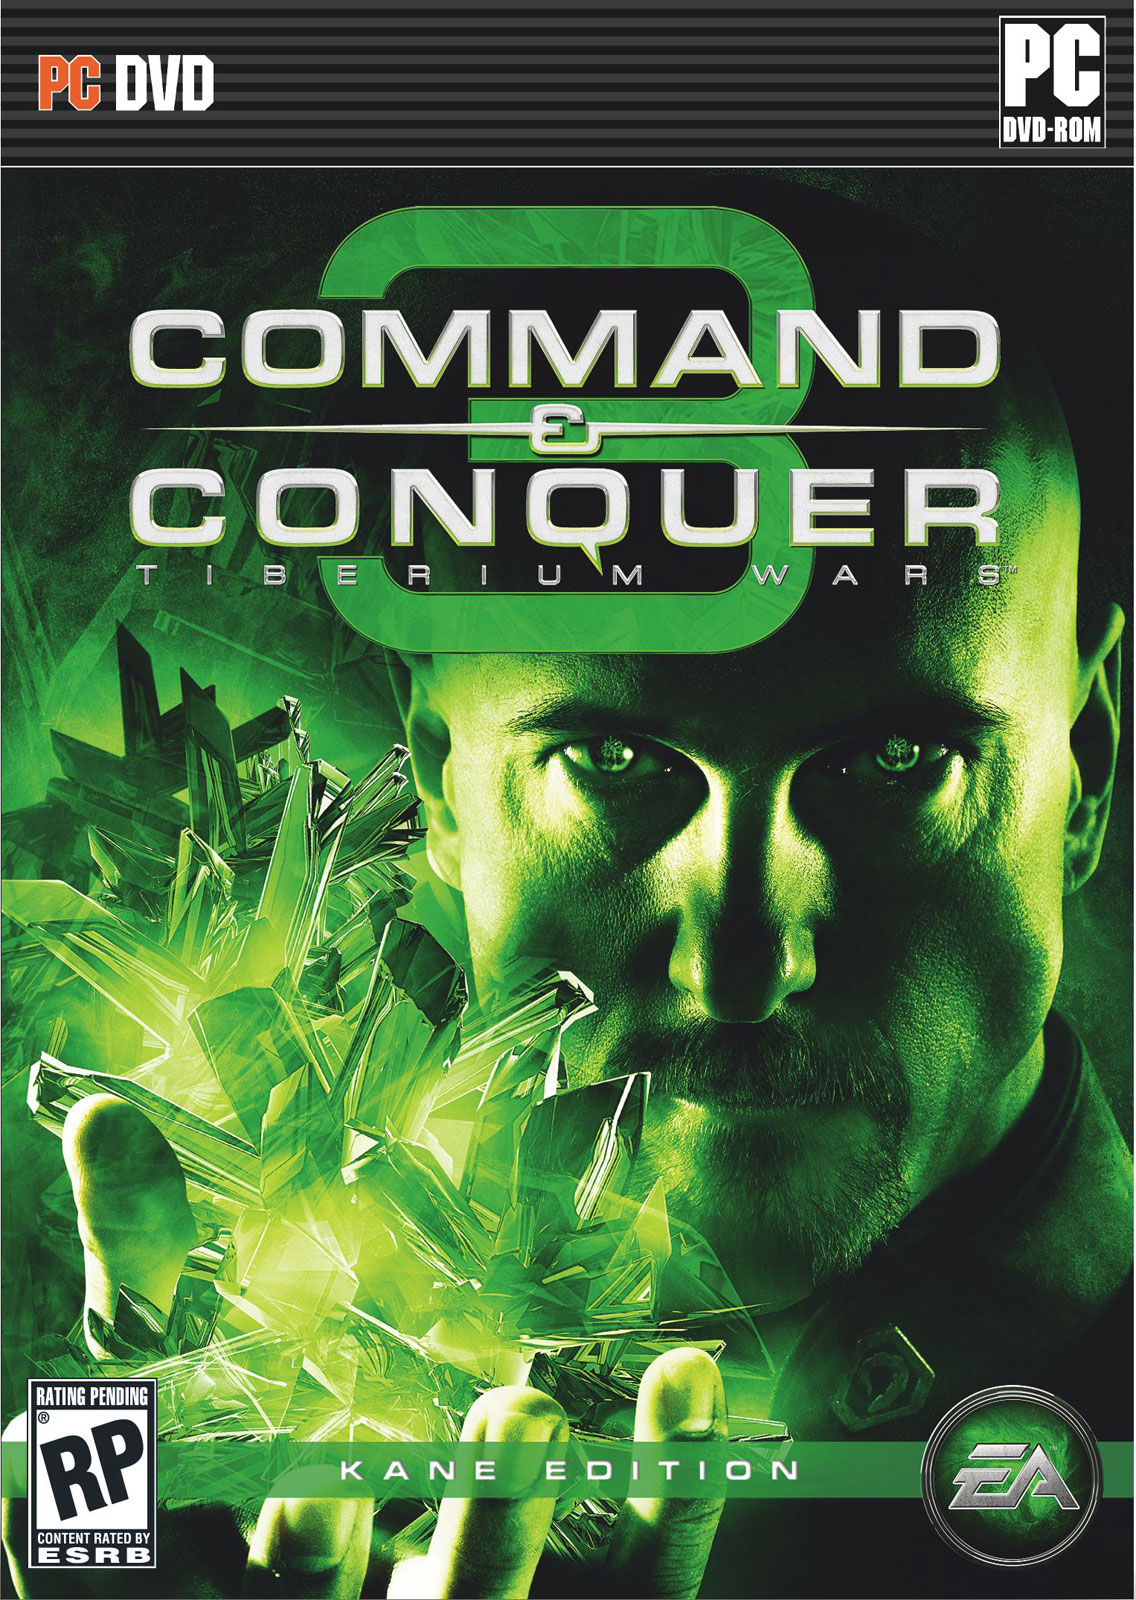 Command and conquer 3 kane wrath cd key changer